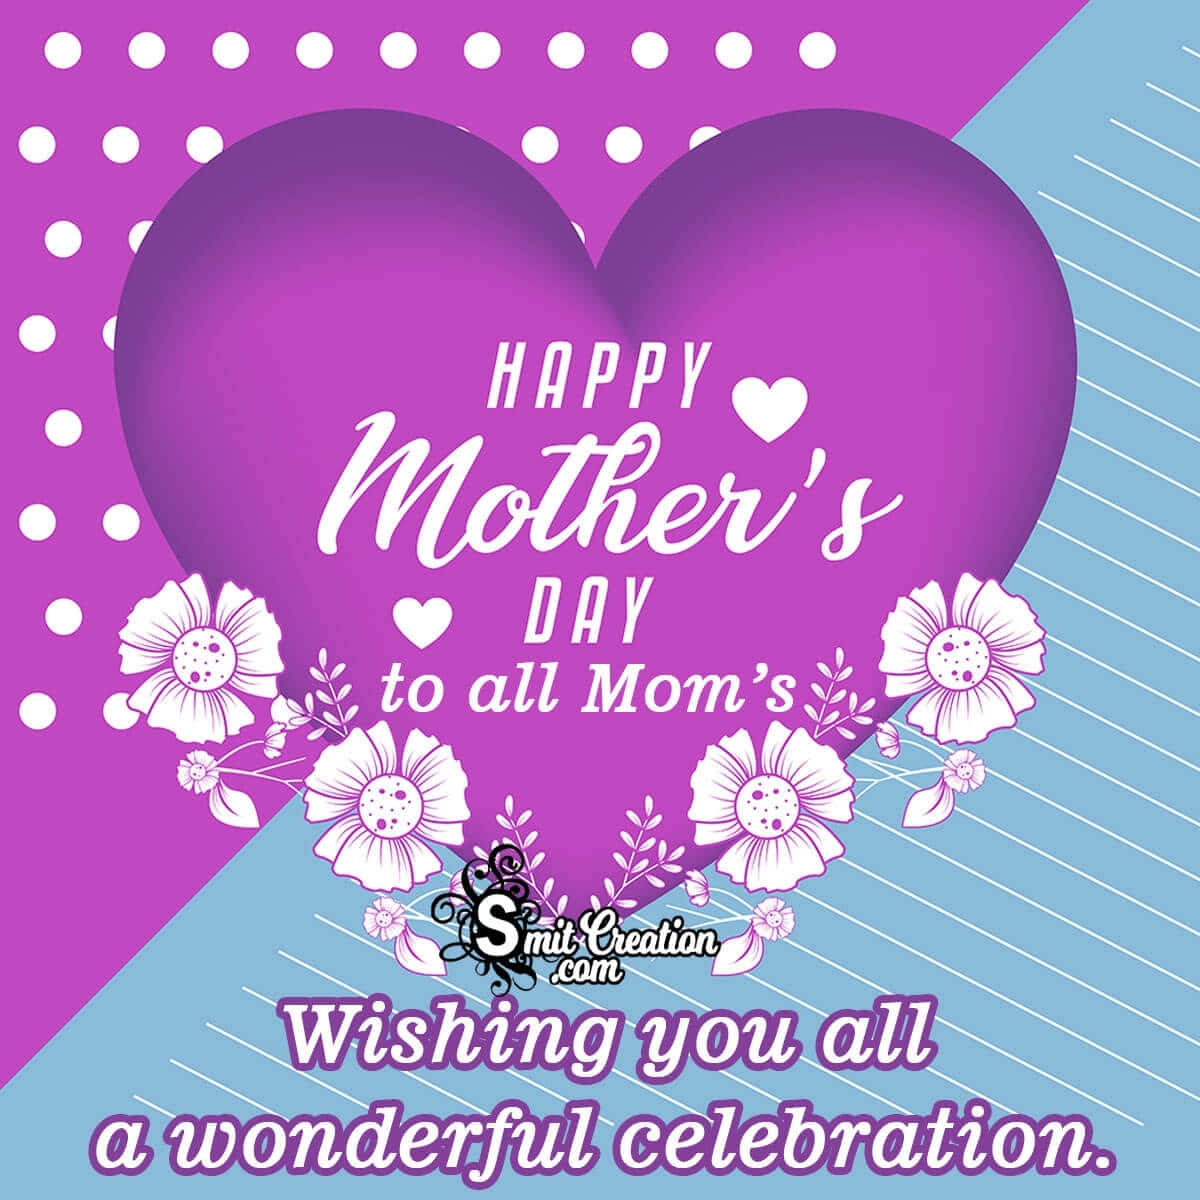 Happy Mother's Day! Celebrate the love and special bond of mothers and children.